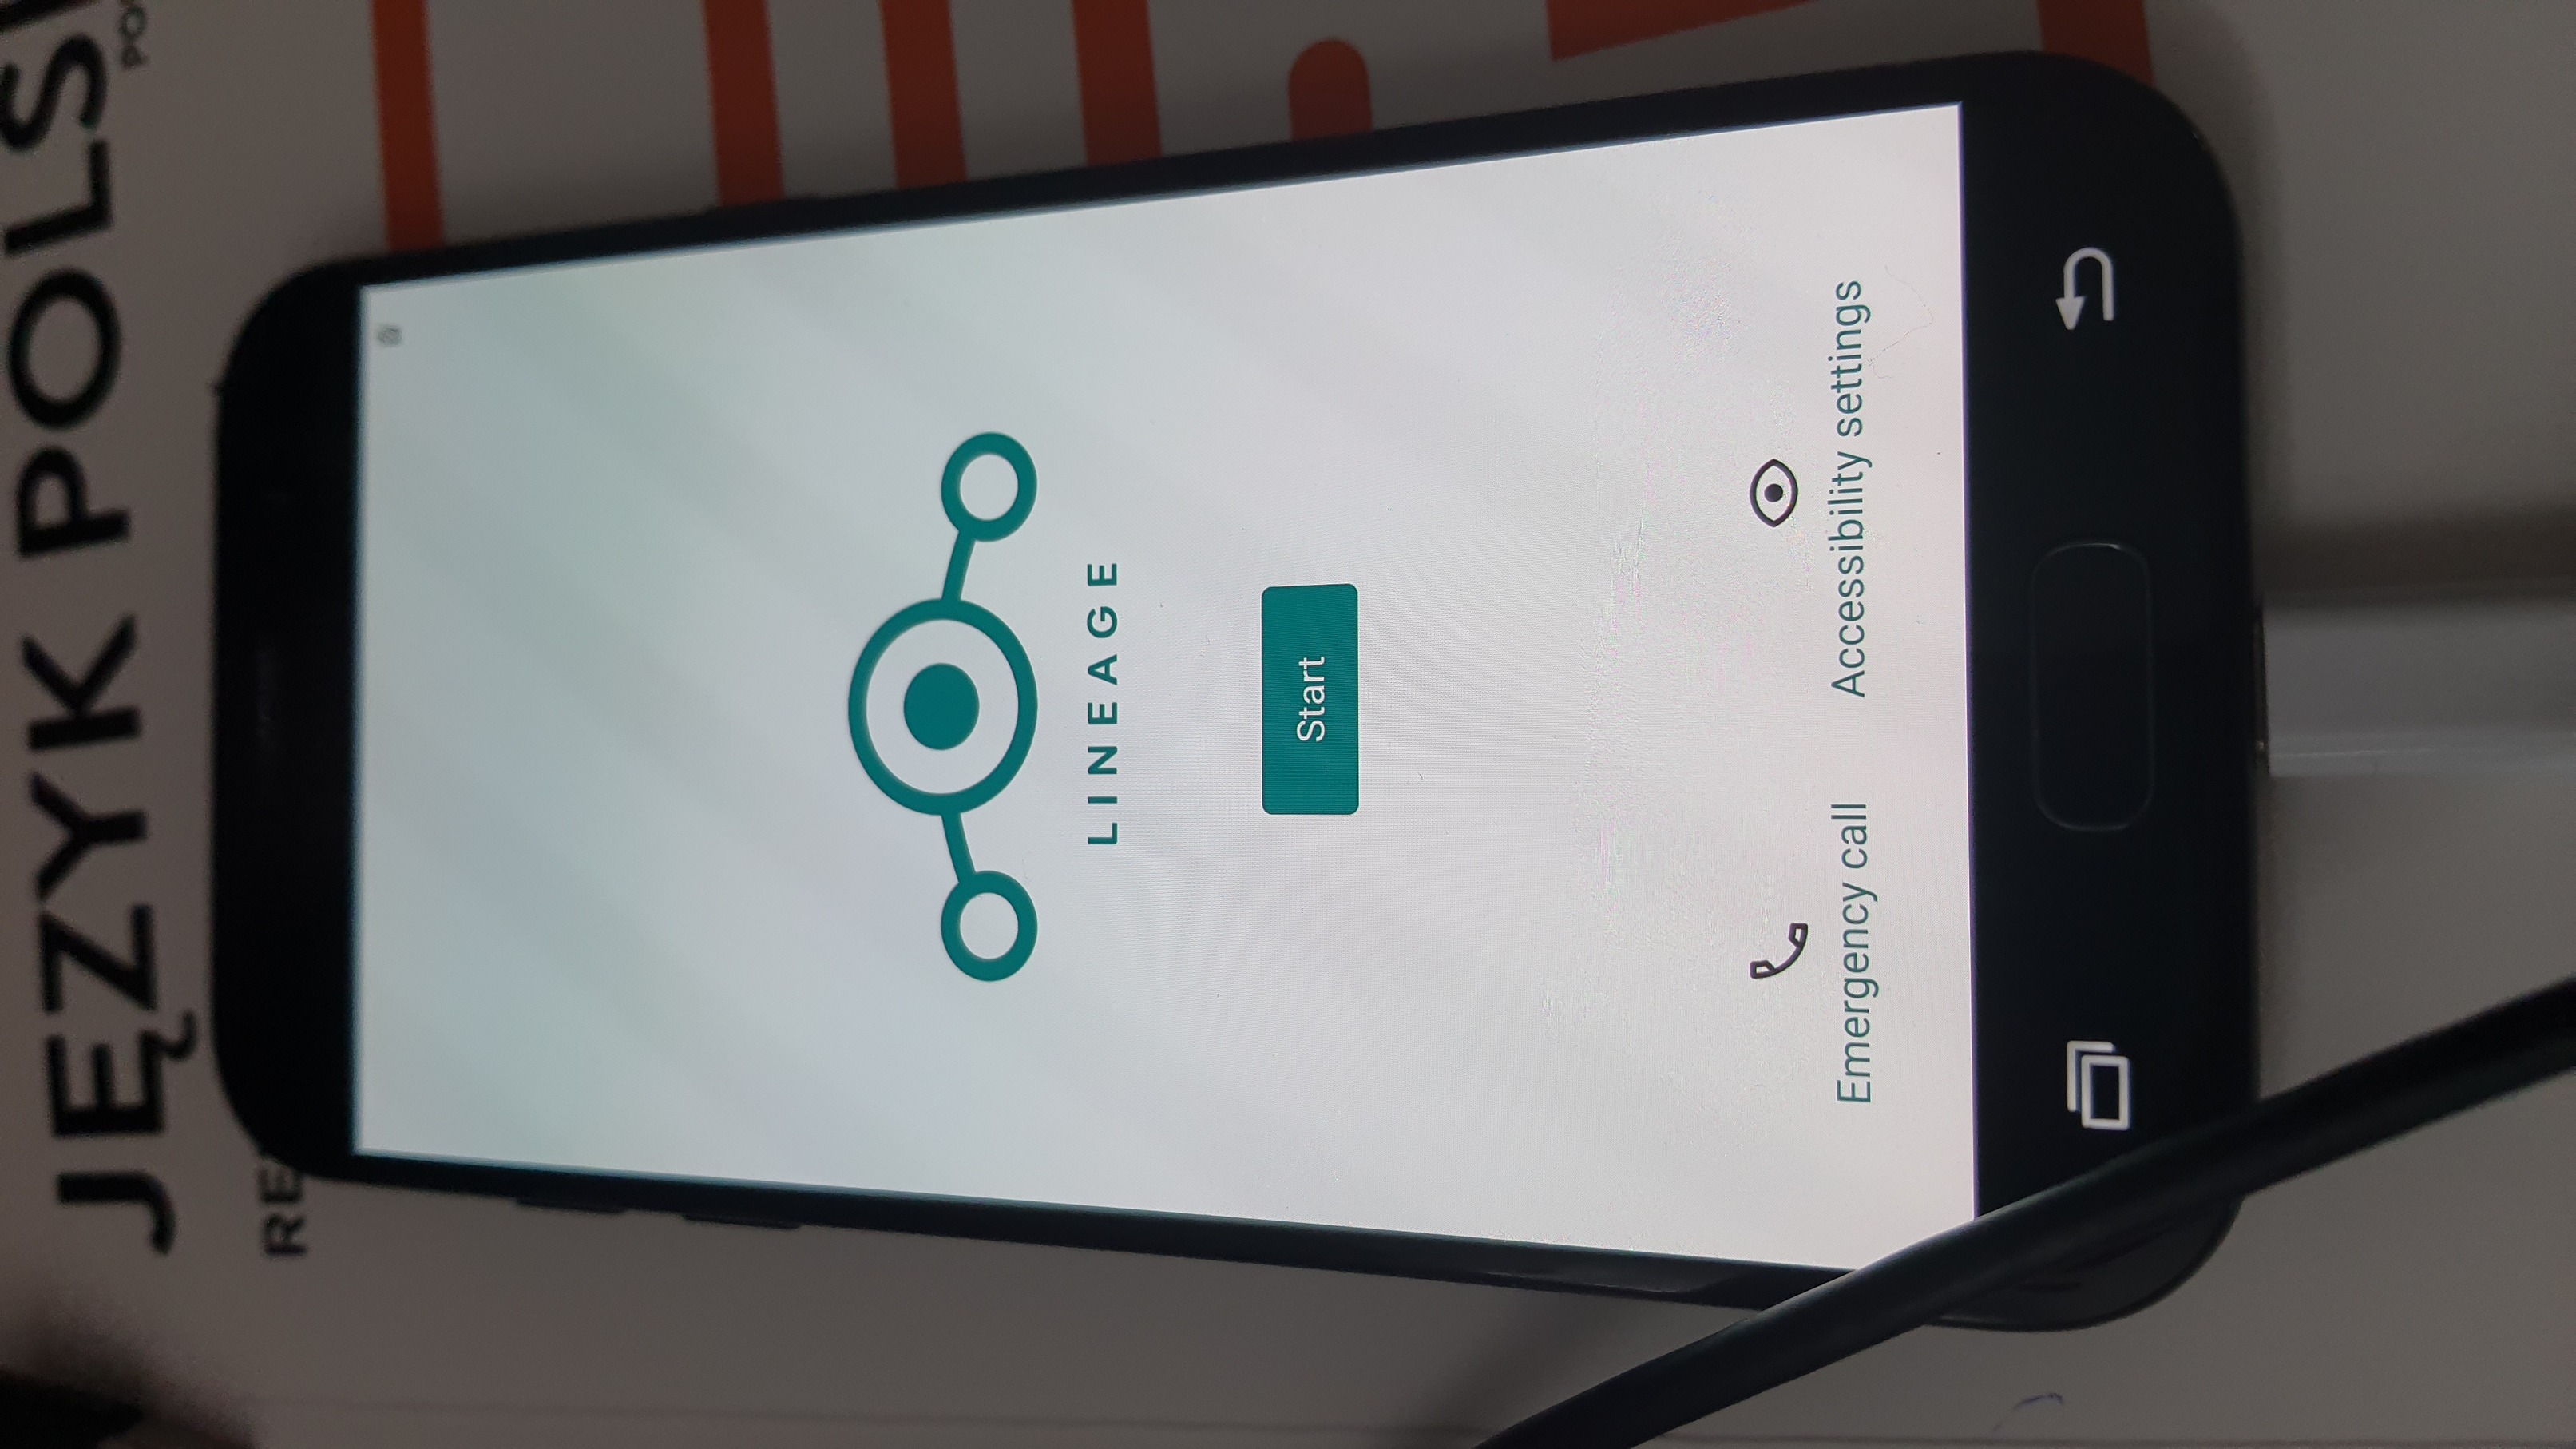 the same smartphone, showing the boot splash screen for LineageOS.